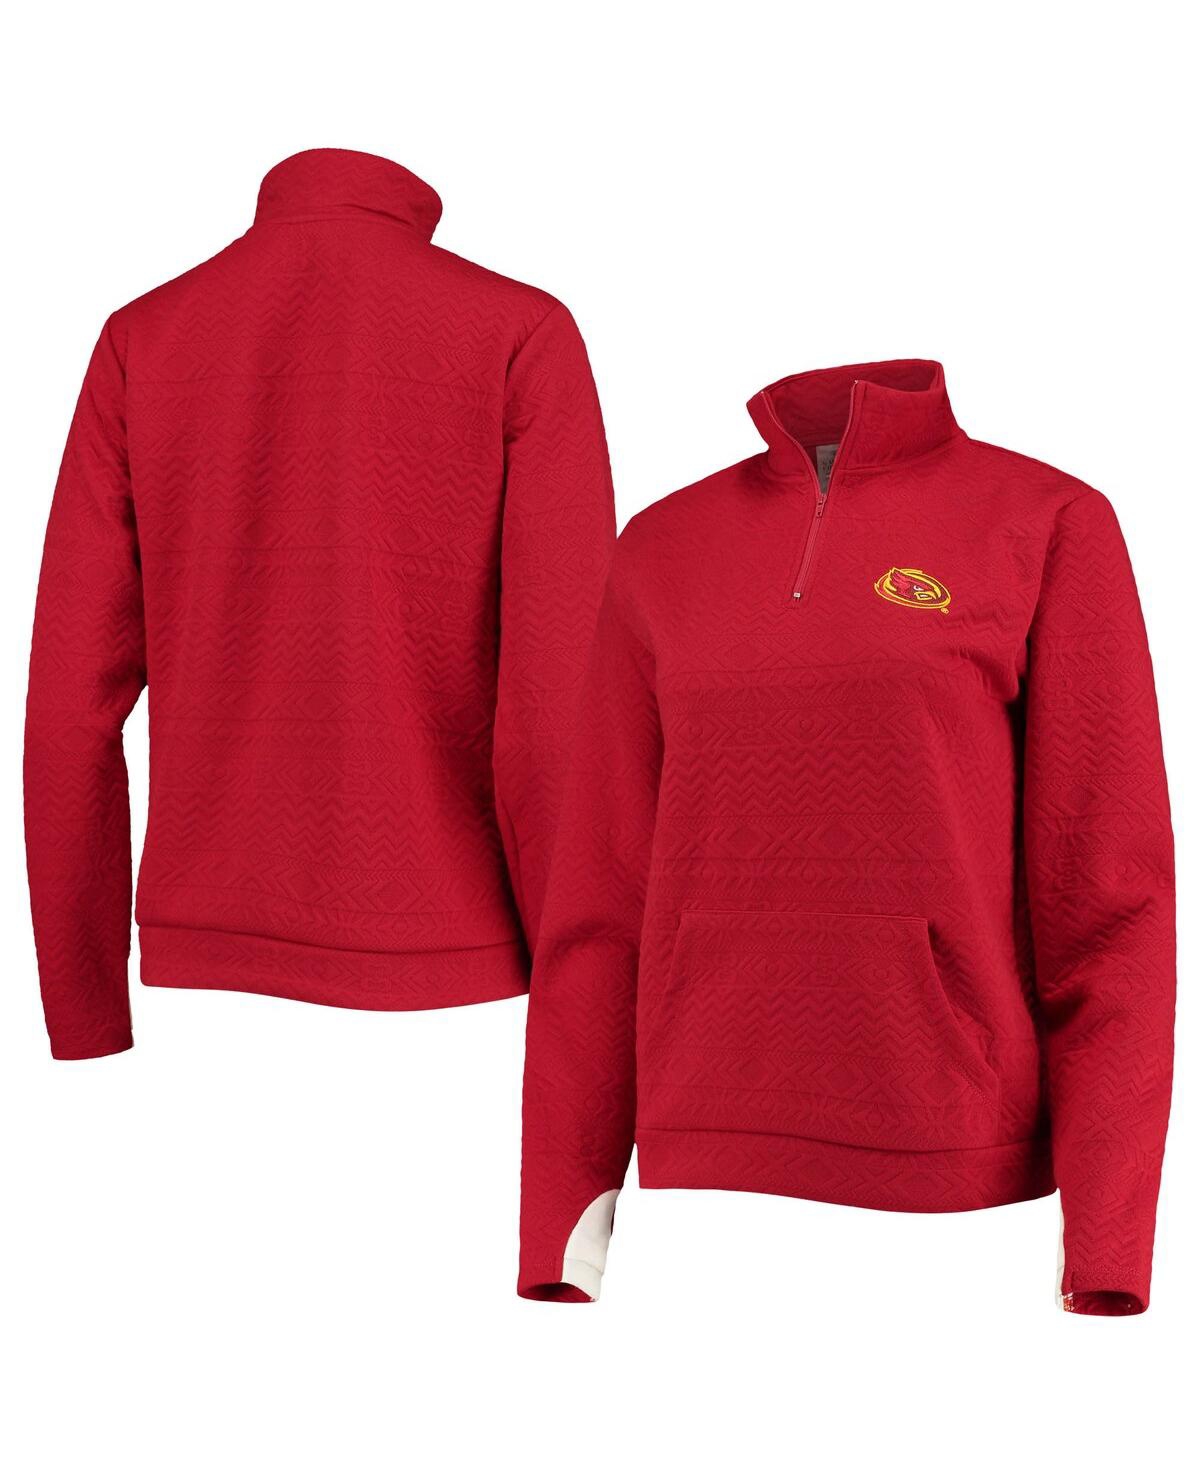 GAMEDAY COUTURE WOMEN'S GAMEDAY COUTURE CARDINAL IOWA STATE CYCLONES EMBOSSED QUARTER-ZIP JACKET